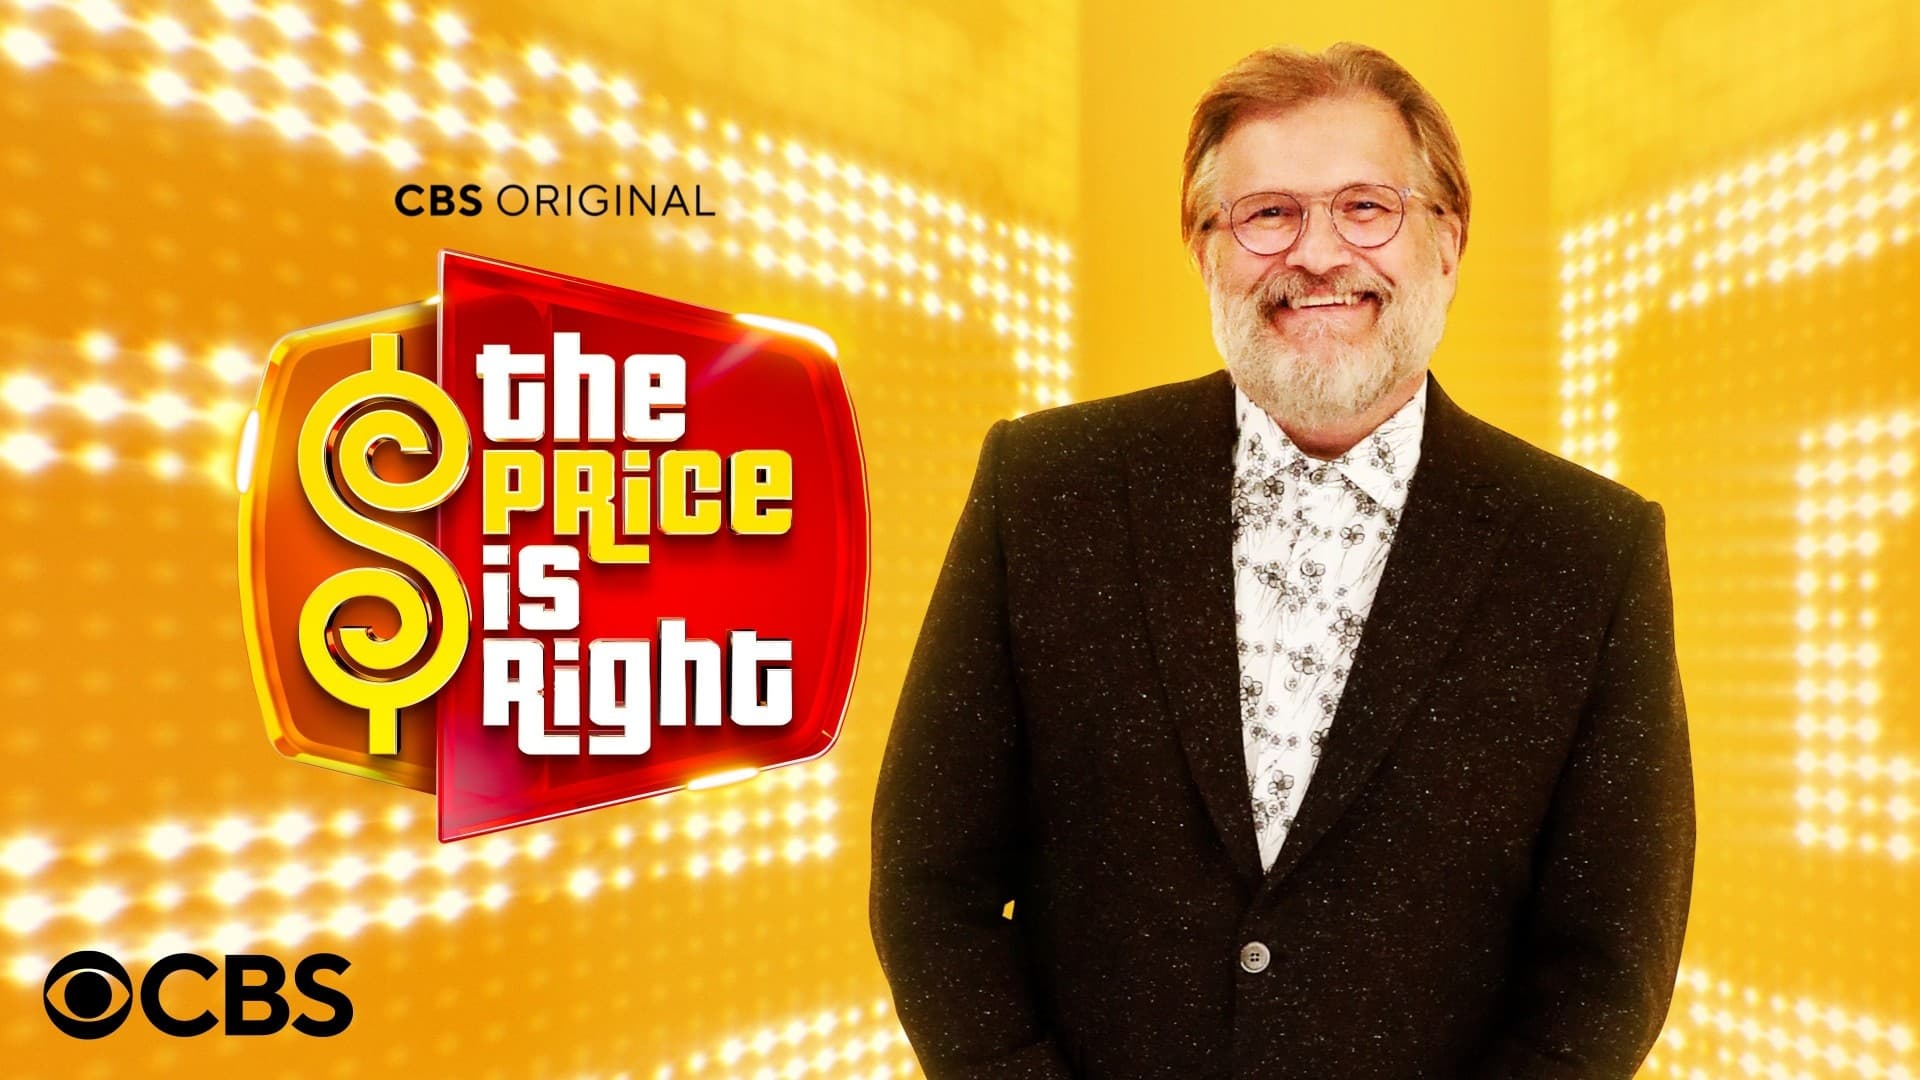 The Price Is Right - Season 3 Episode 135 : The Price Is Right Season 3 Episode 135